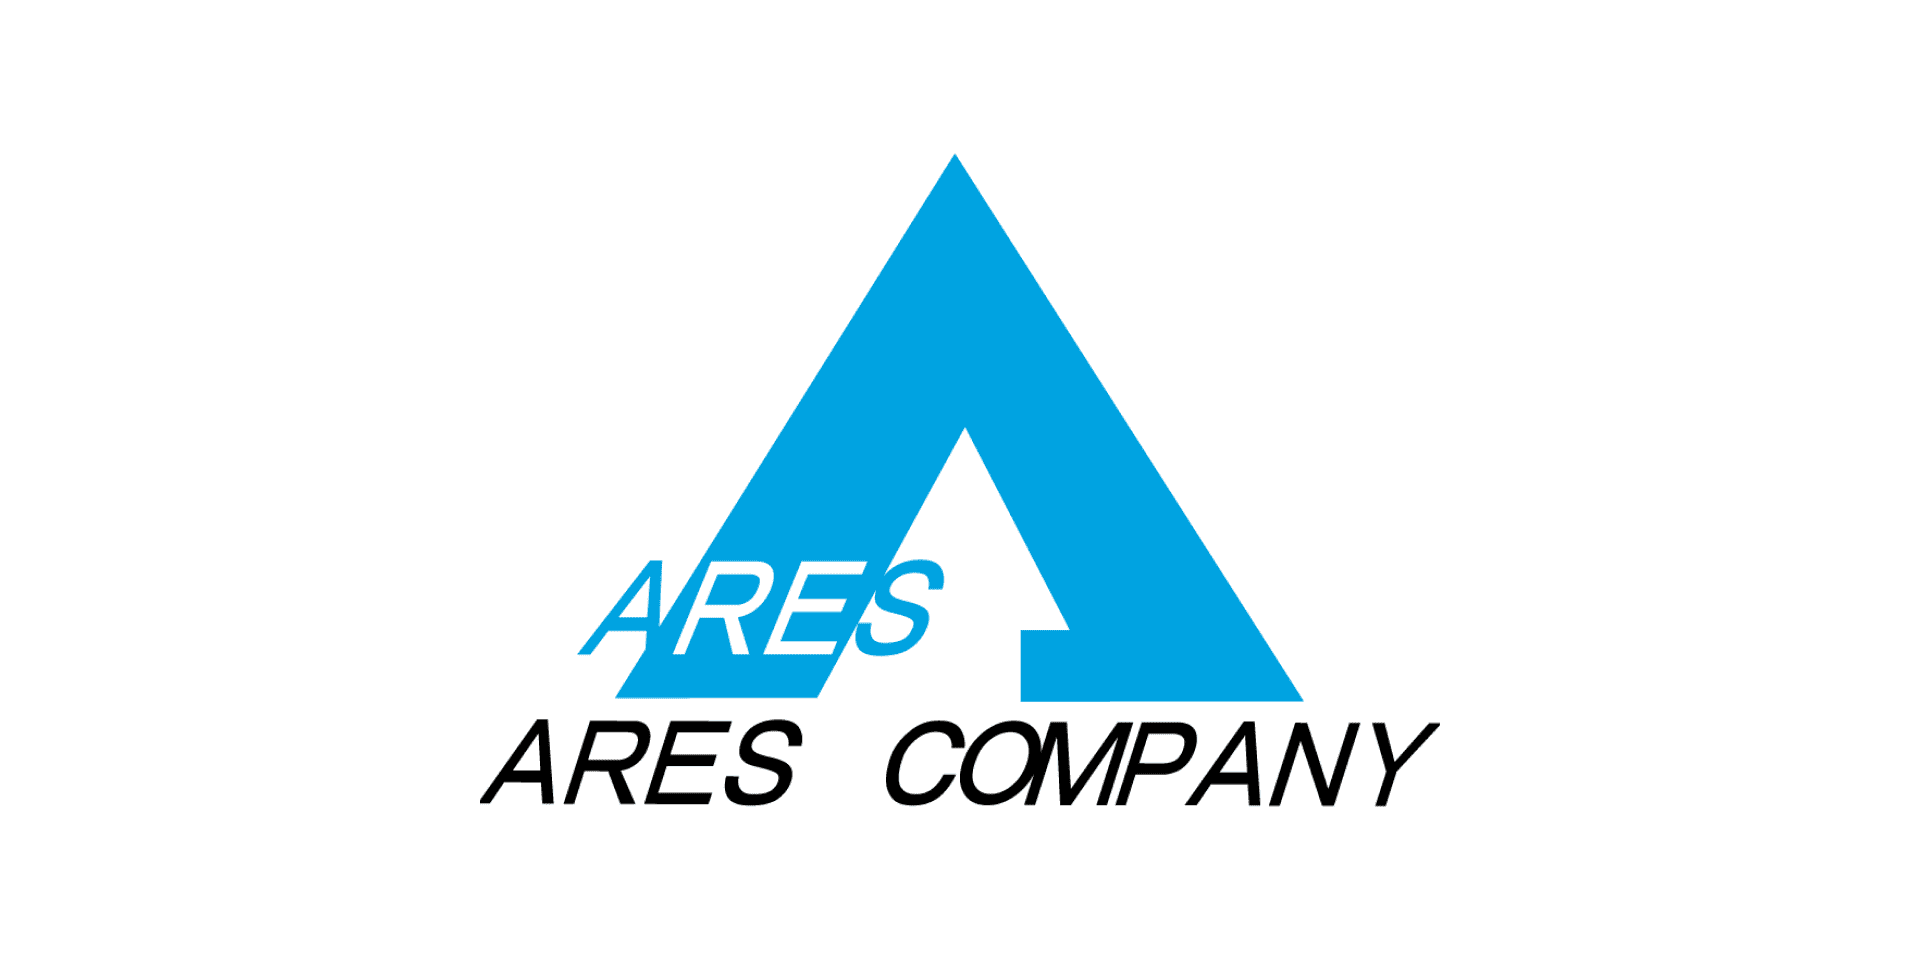 Ares Company Limited joins the GENDA Group. Strengthening the character merchandising area.